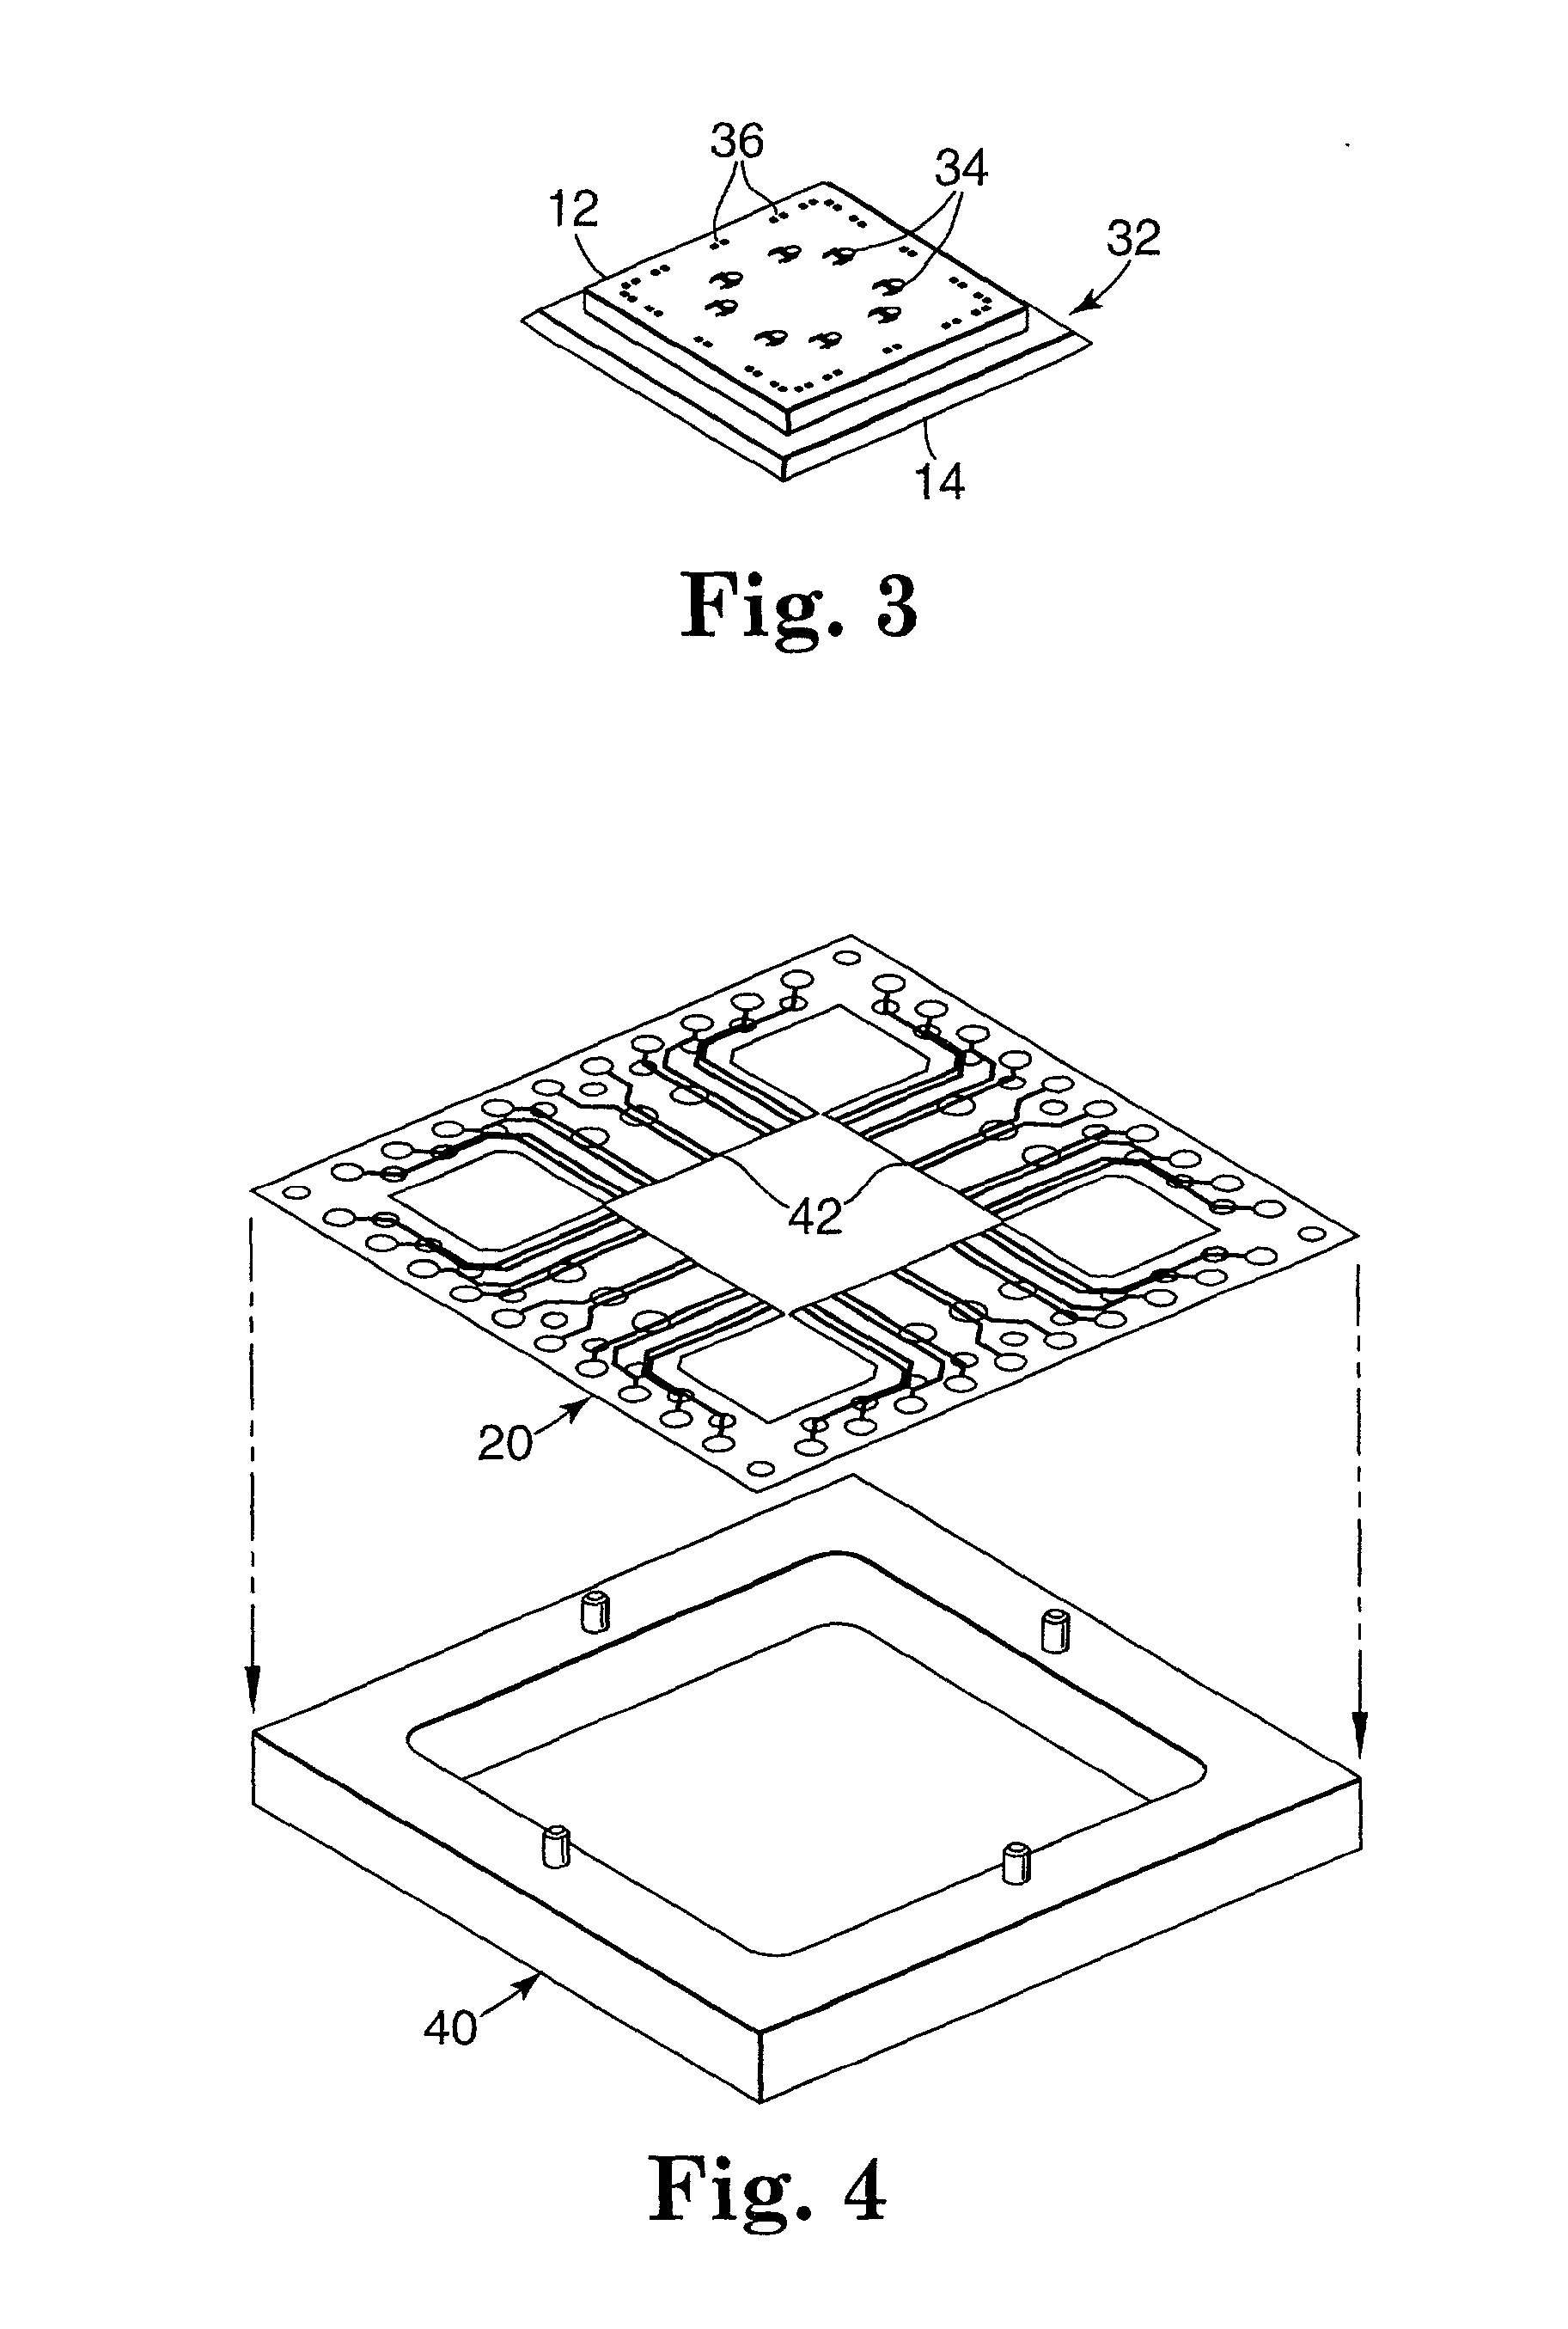 Hermetic package for mems devices with integrated carrier